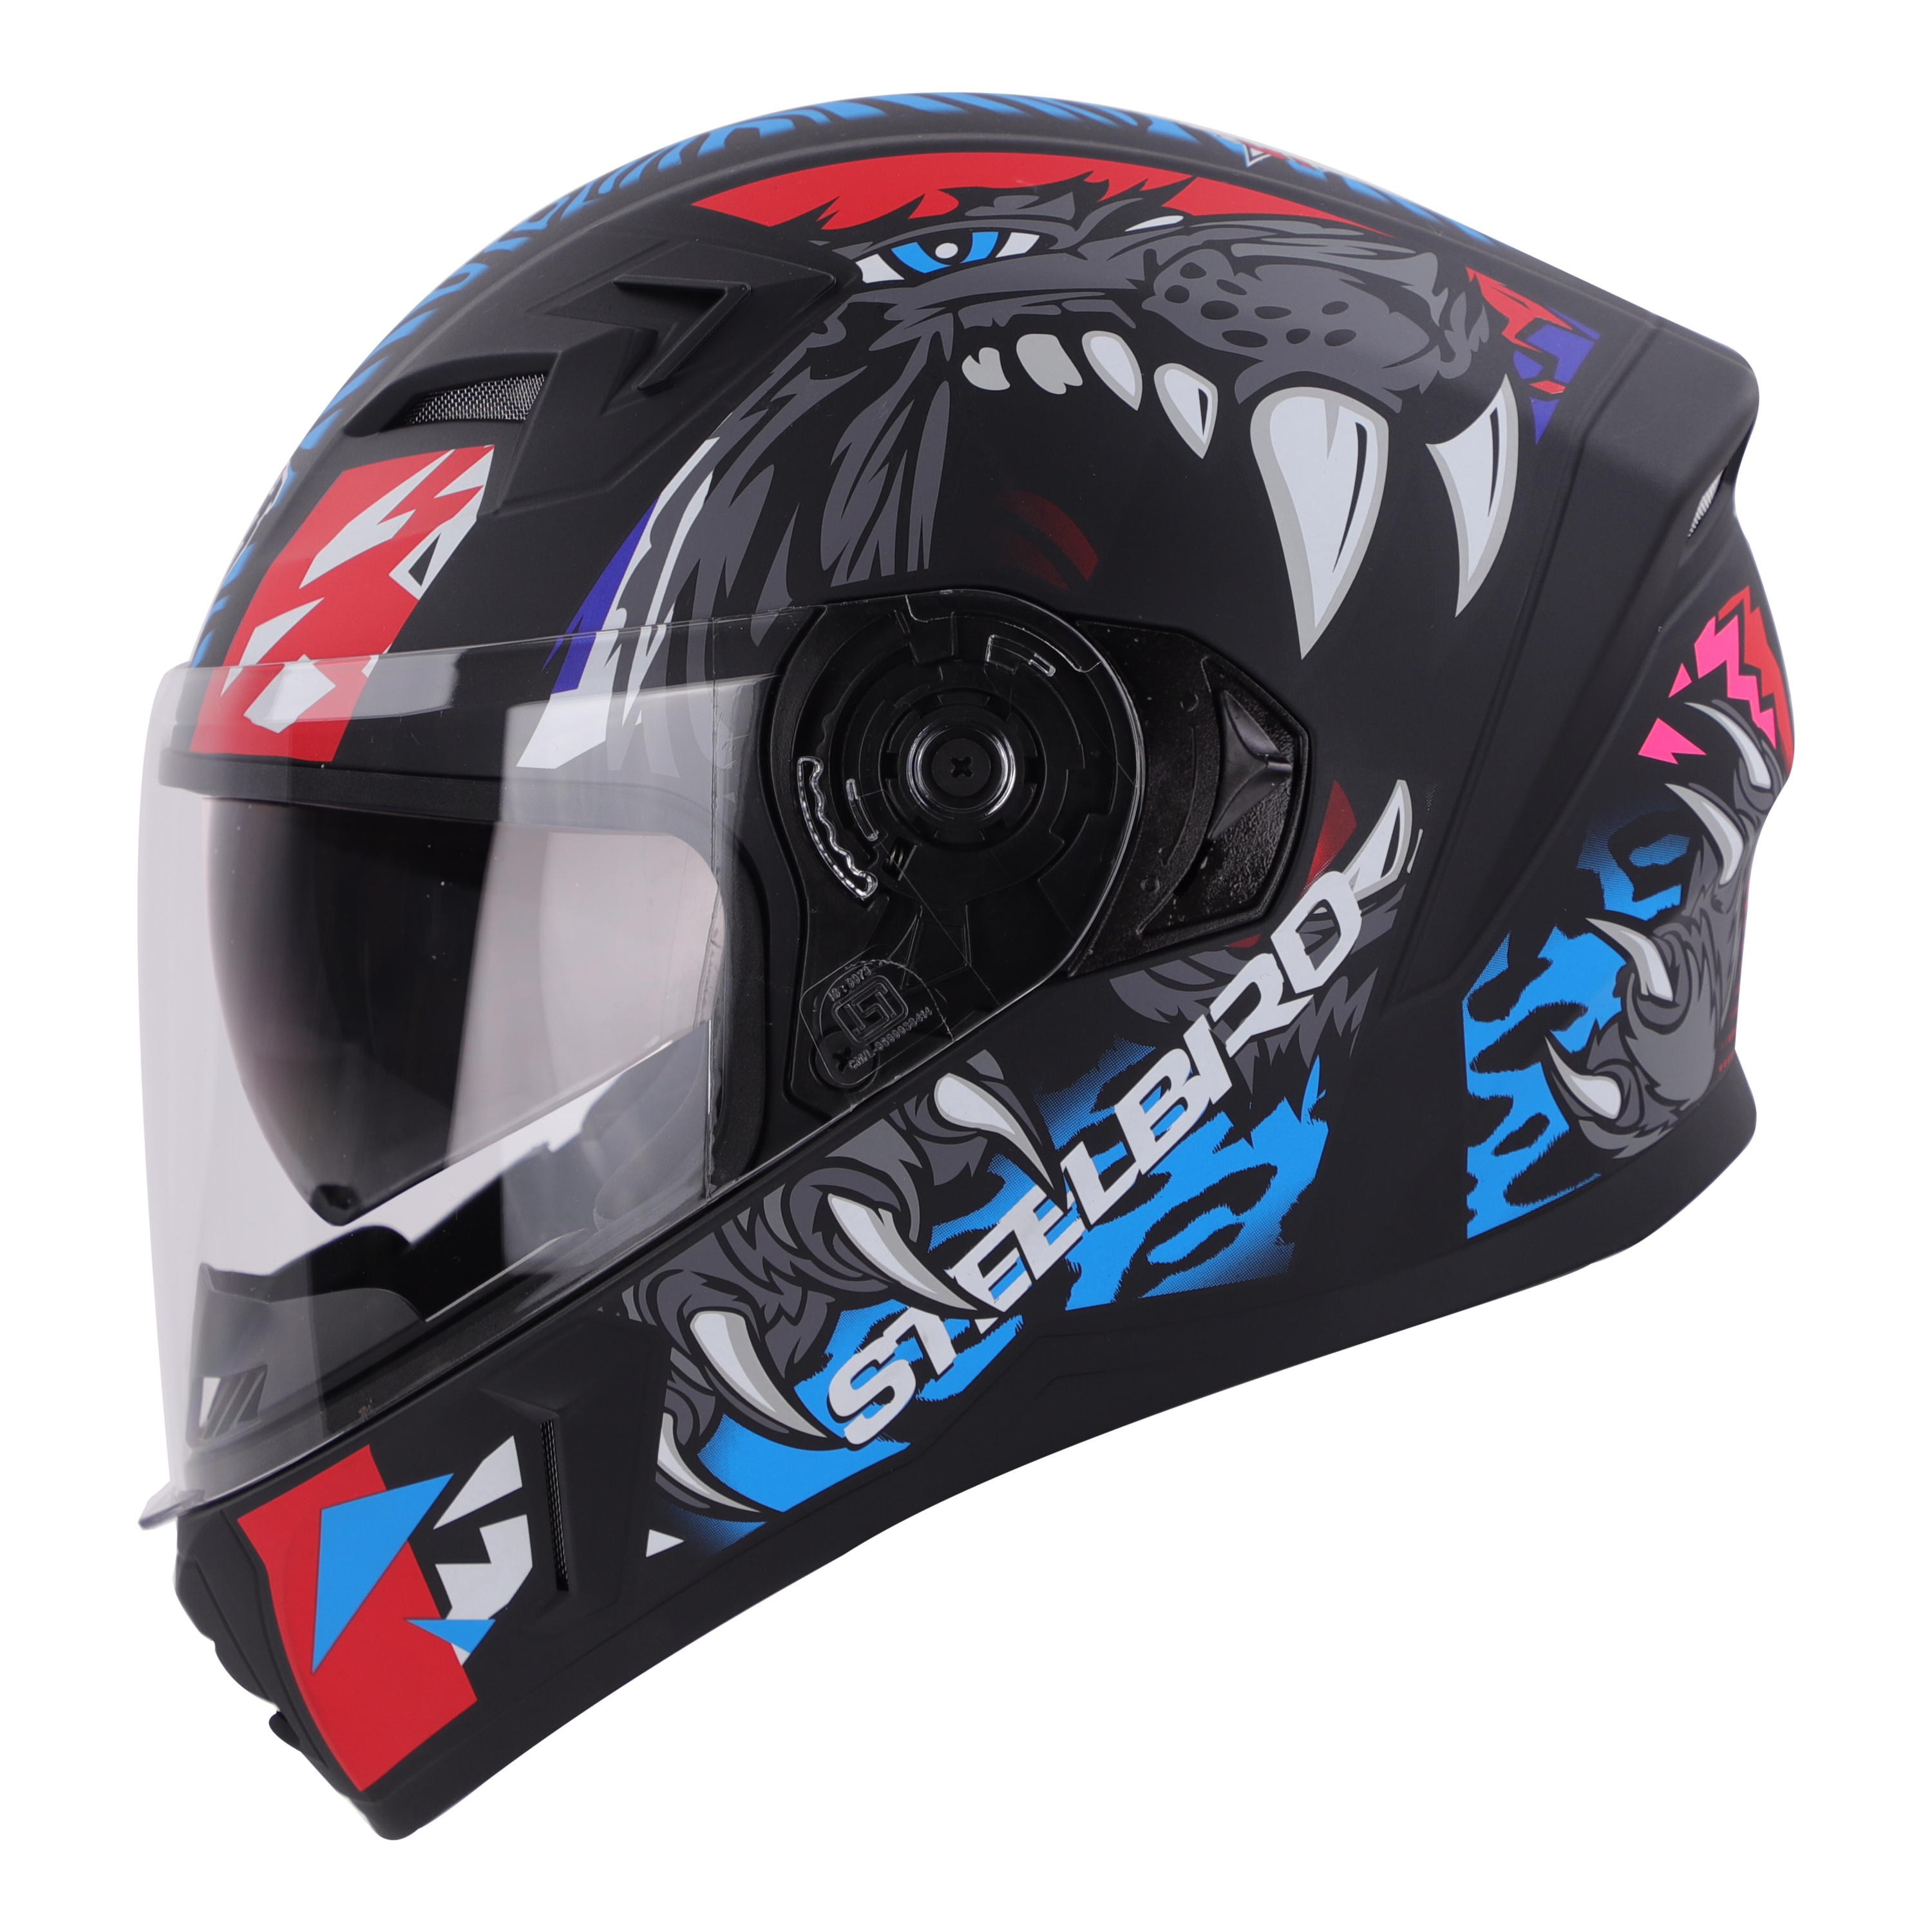 SBA-21 PANTHA MAT BLACK WITH RED/BLUE (WITH INNER SUN SHIELD & LONG CHEEK PAD INTERIOR)